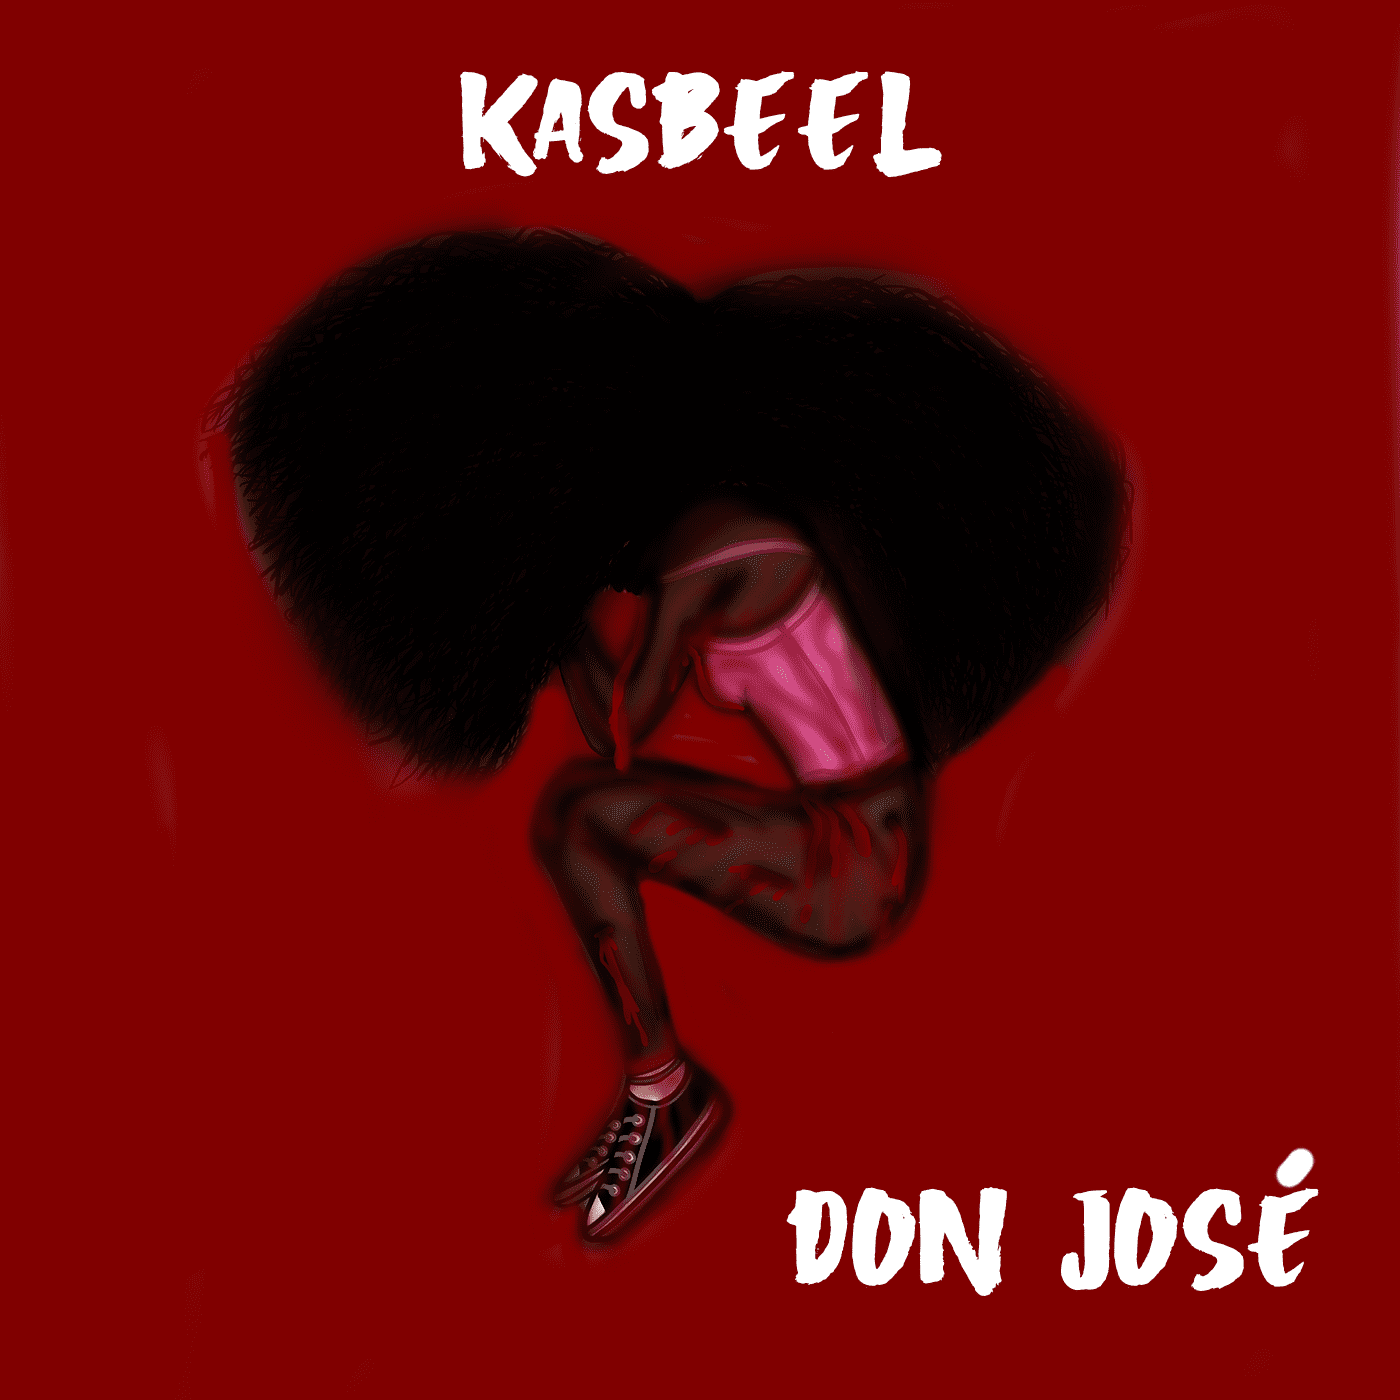 Cover art for Kasbeel's song: Don José